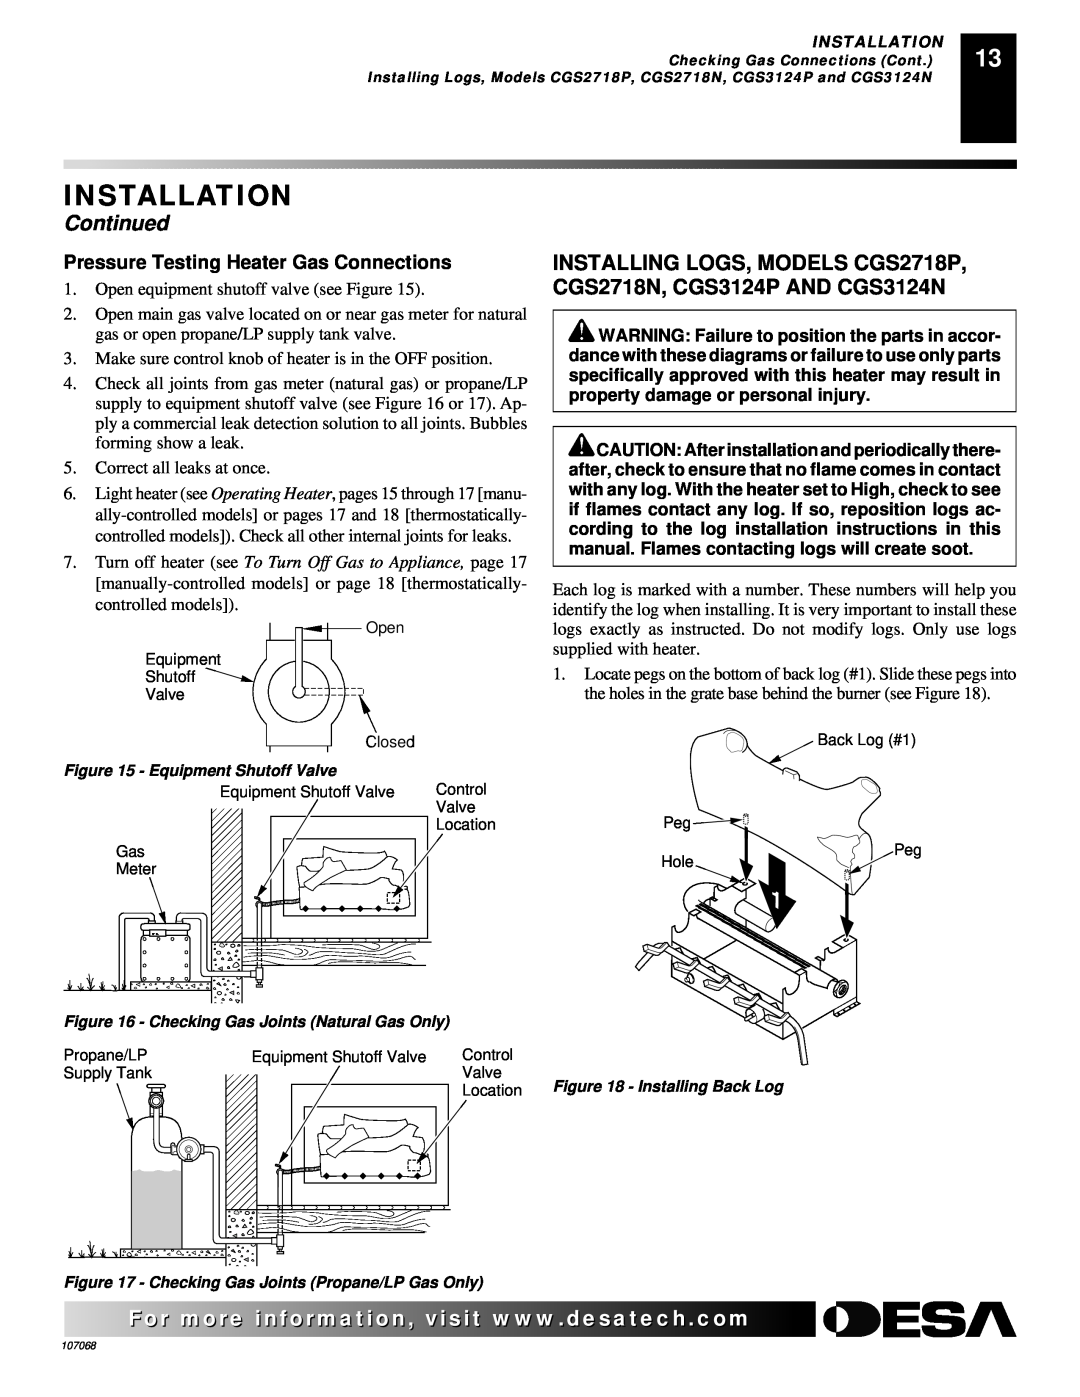 Desa CLD3018NA, CGS3124N, CLD3018PA installation manual Installation, Continued, Pressure Testing Heater Gas Connections 